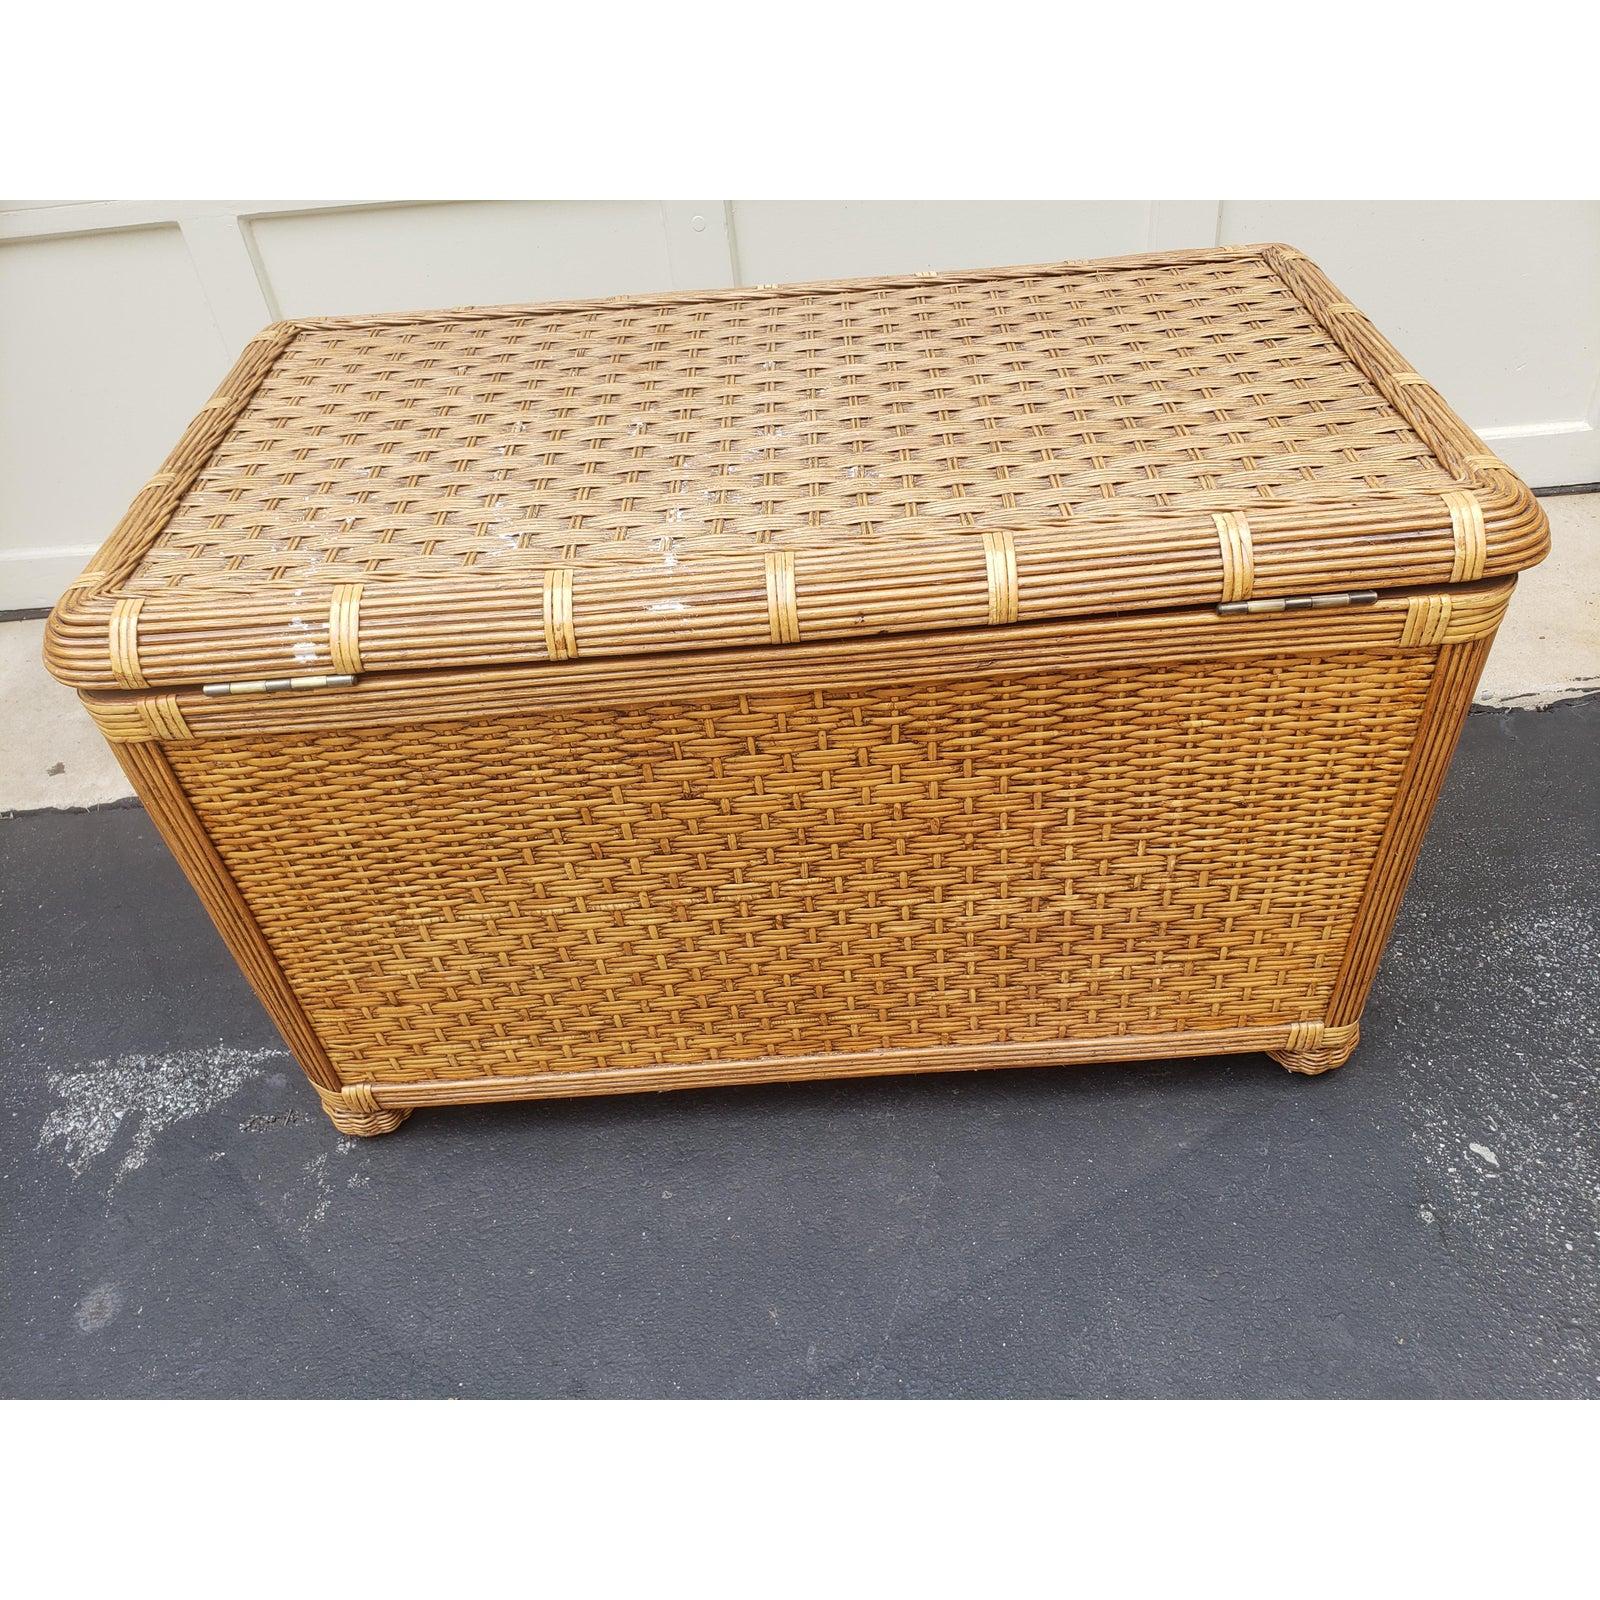 1970s Rattan Wicker storage blanket chest trunk. Trunk in good condition. Measure 37